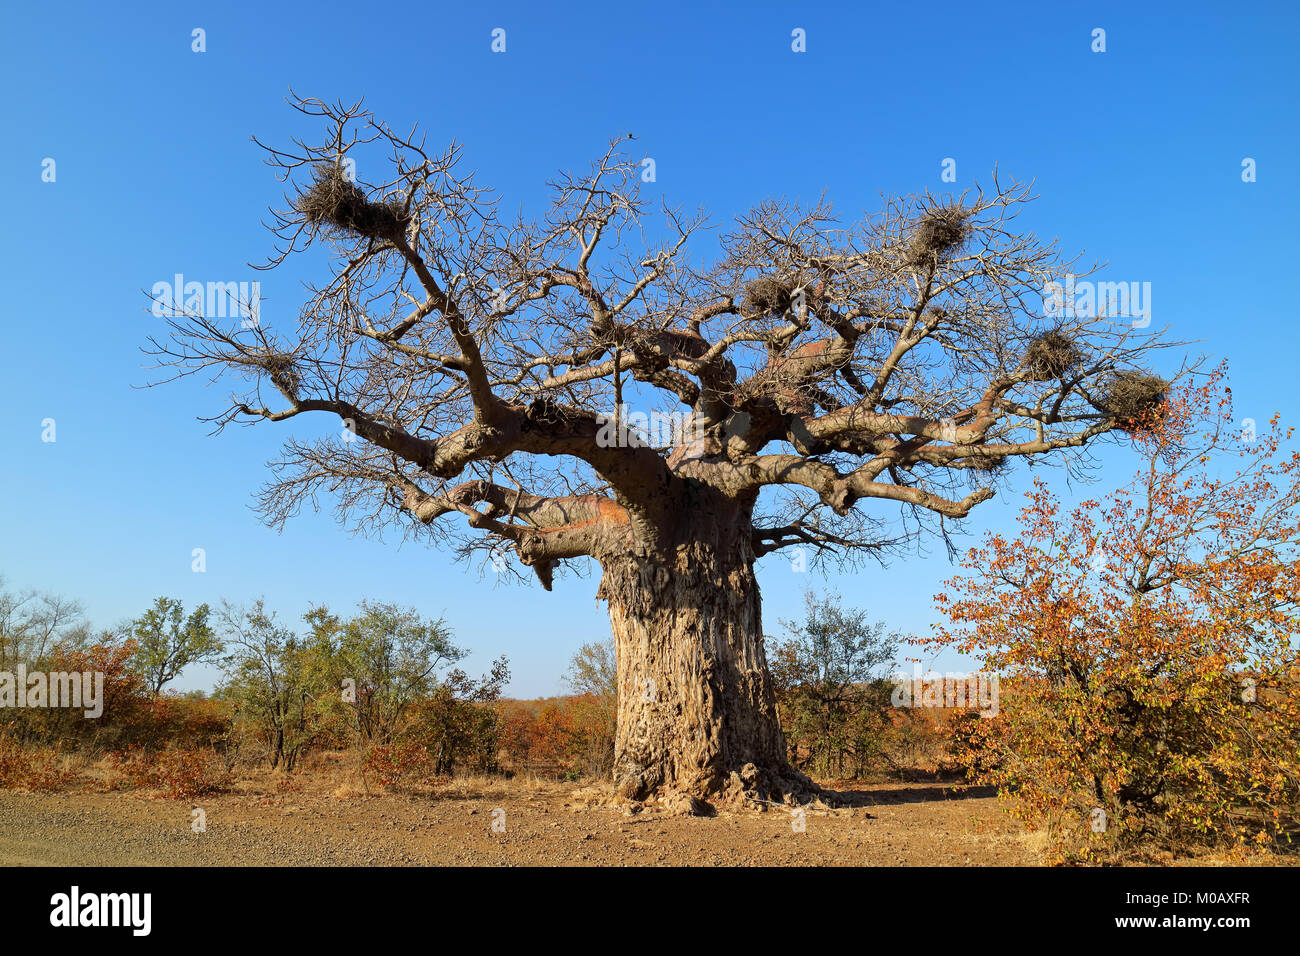 Baobab tree during the dry season, Kruger National Park, South Africa Stock Photo